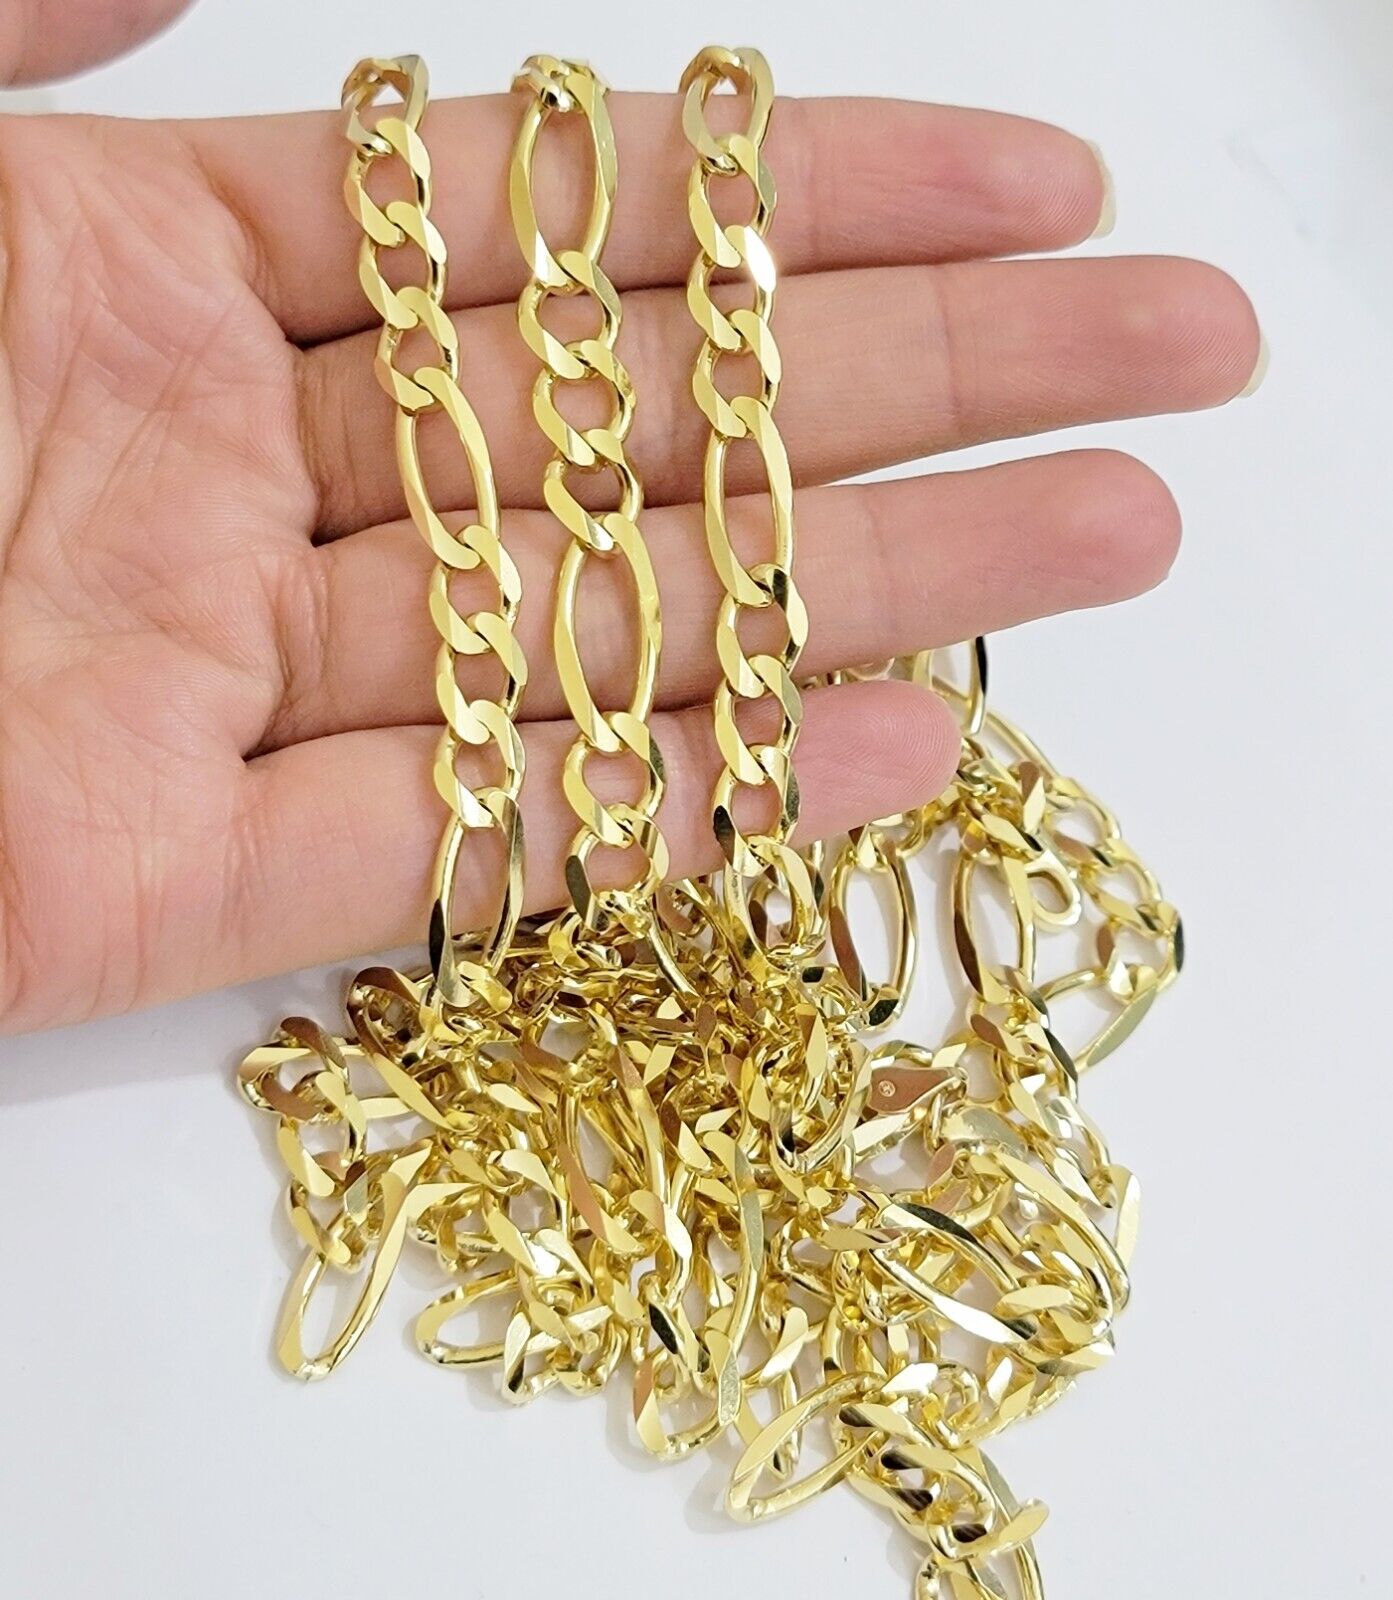 Figaro Link Chain 14k Yellow Gold 8mm Necklace 18- 30 Inch SOLID 14kt STRONG